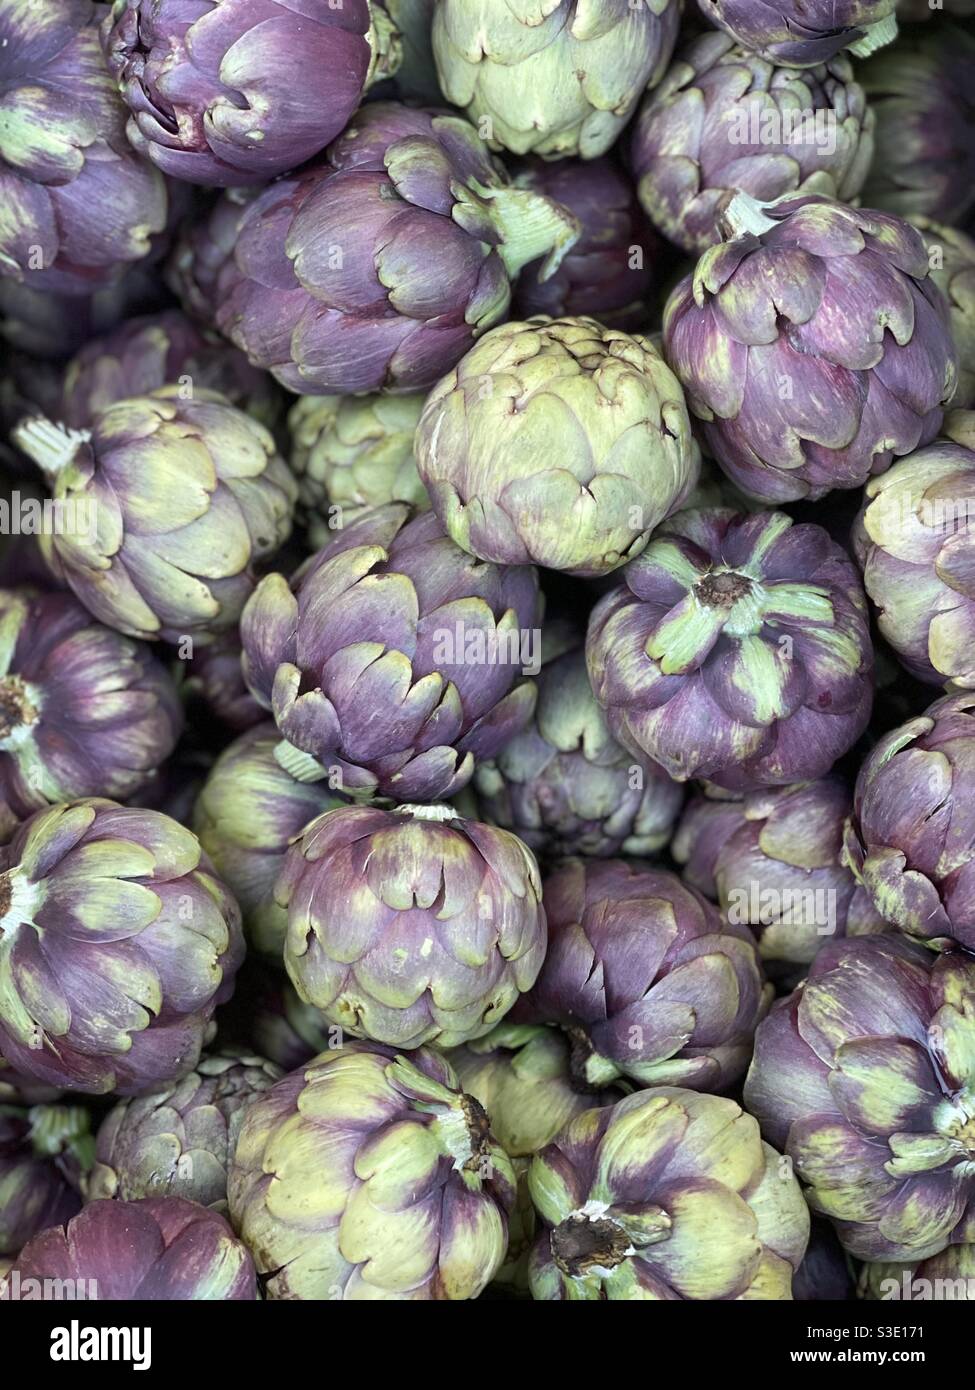 Artichokes at the vegetables market Stock Photo